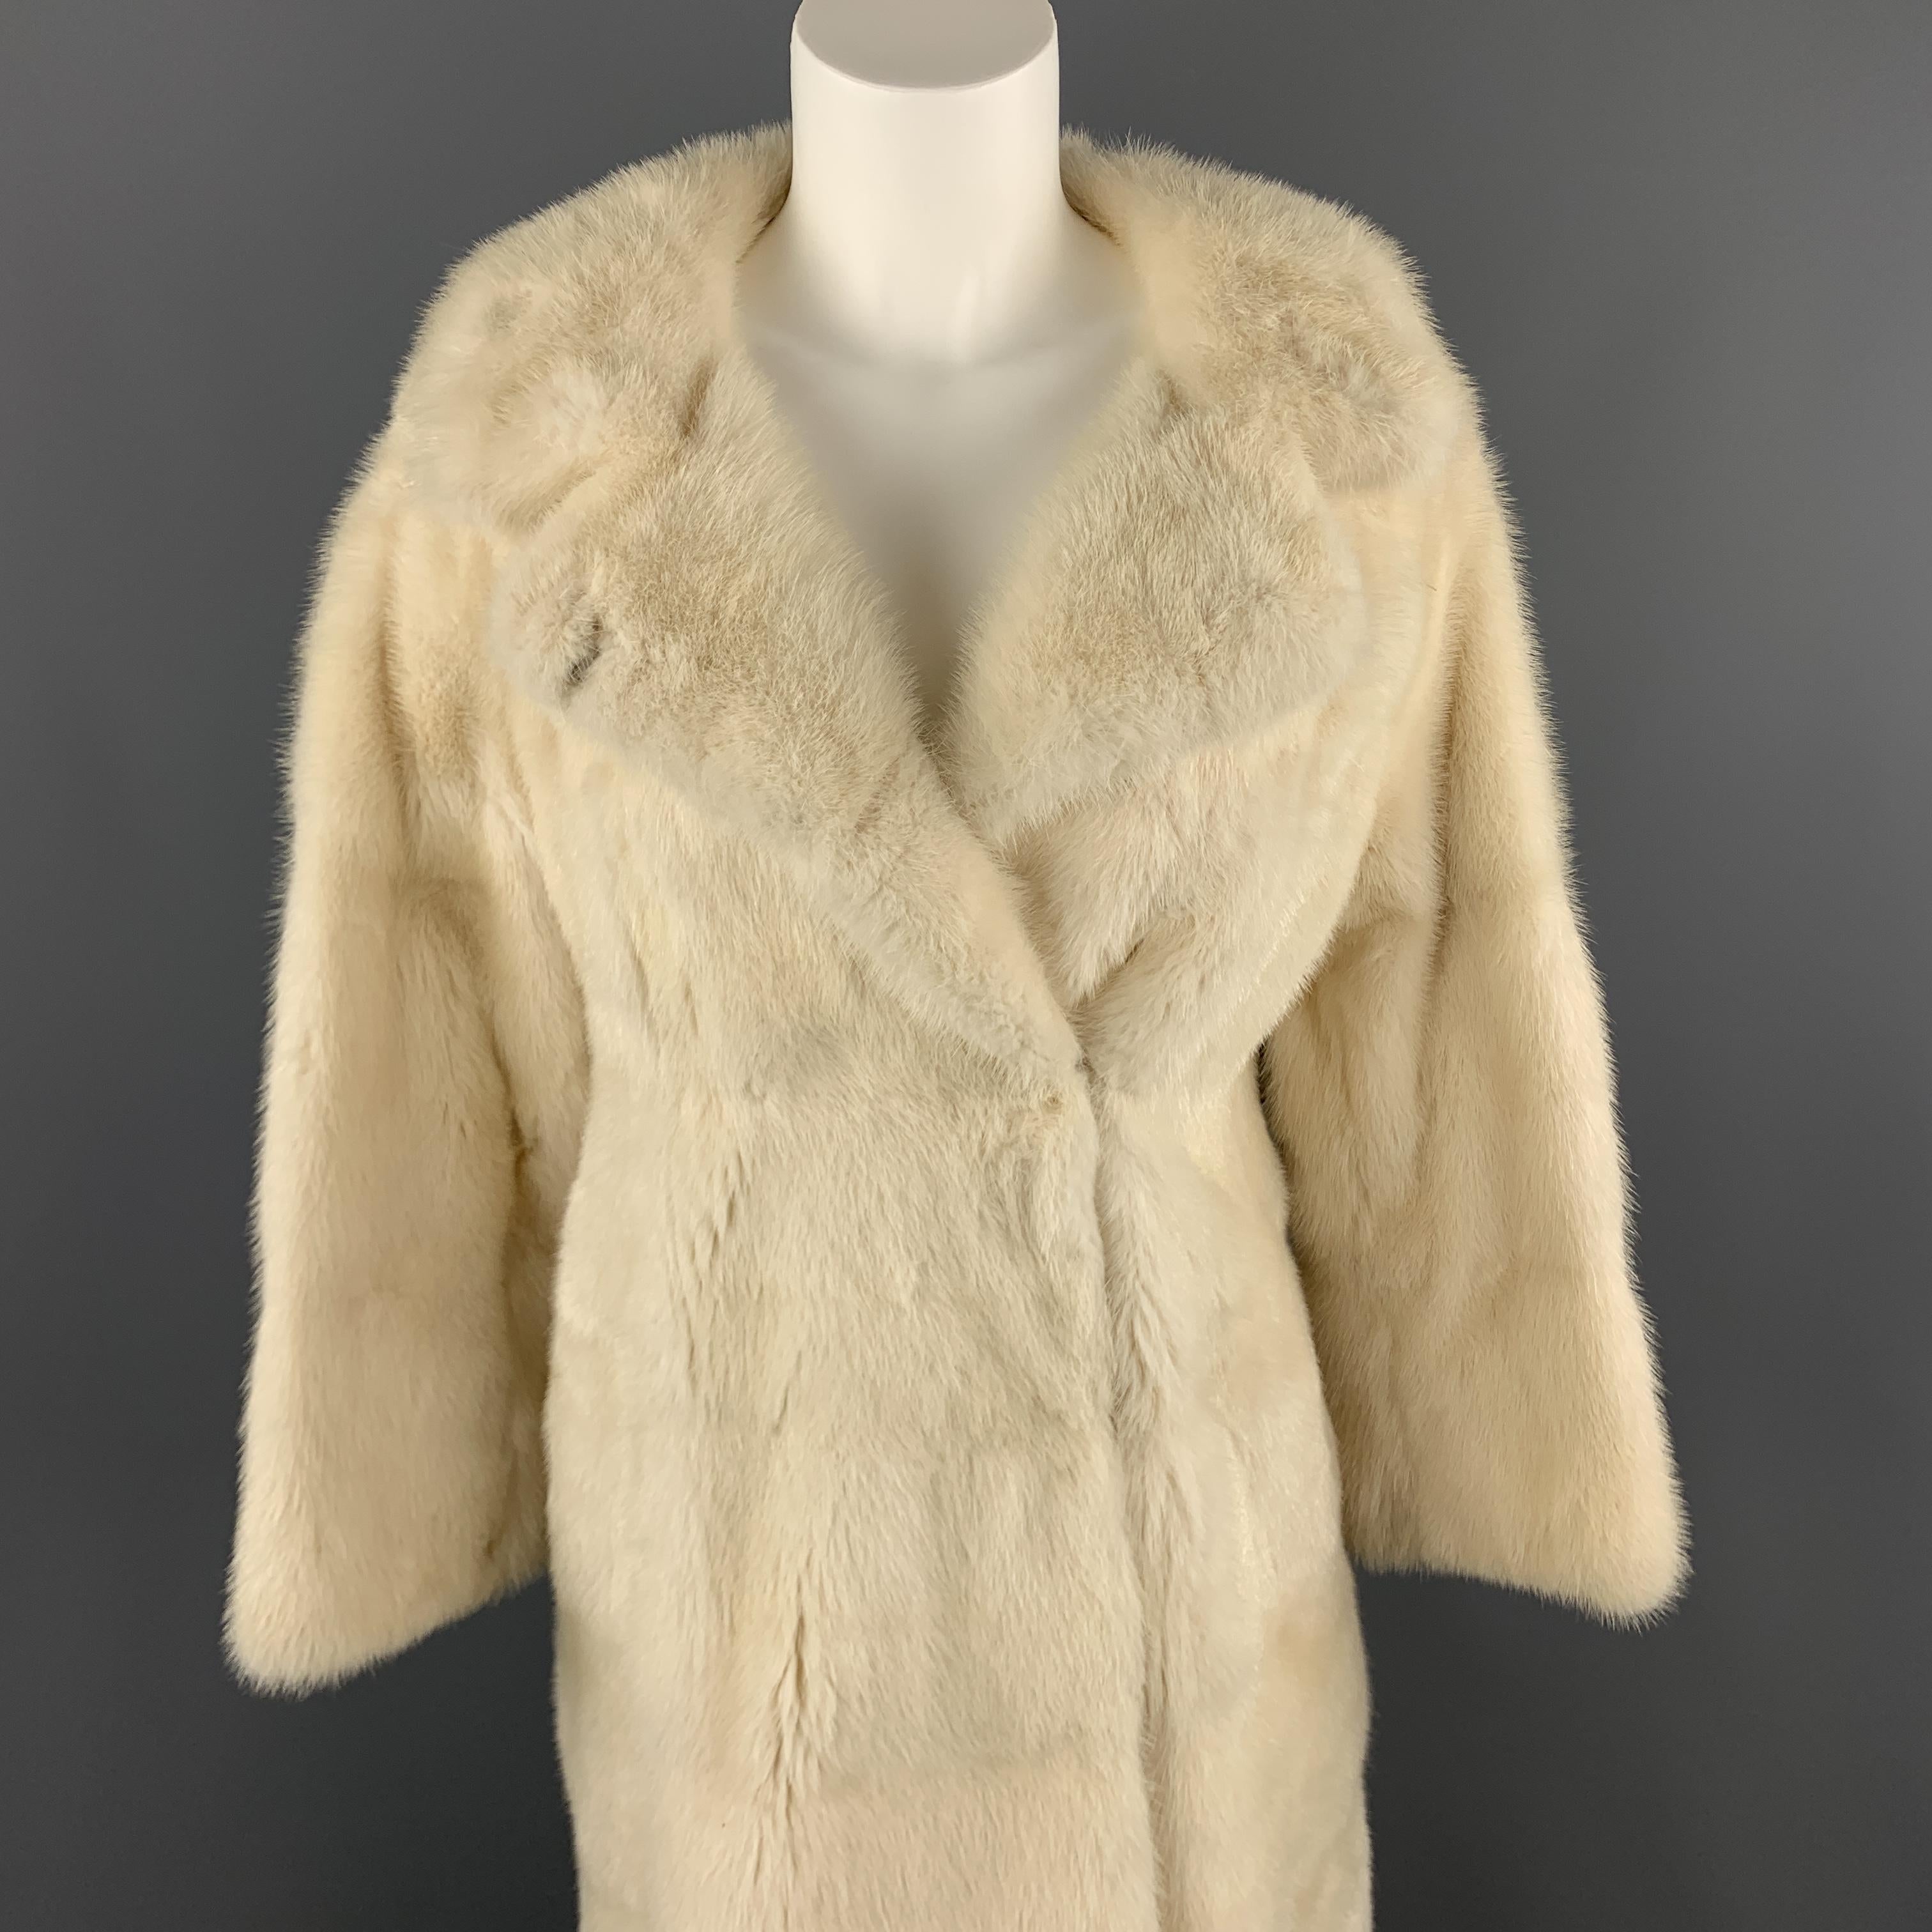 Vintage NEUSTETERS fur coat comes in creamy off white mink with a collared neckline, slit pockets, and double breasted hidden hook eye closures. Made in USA. 

Very Good Pre-Owned Condition.
Marked: M

Measurements:

Shoulder: 18 in.
Bust: 38